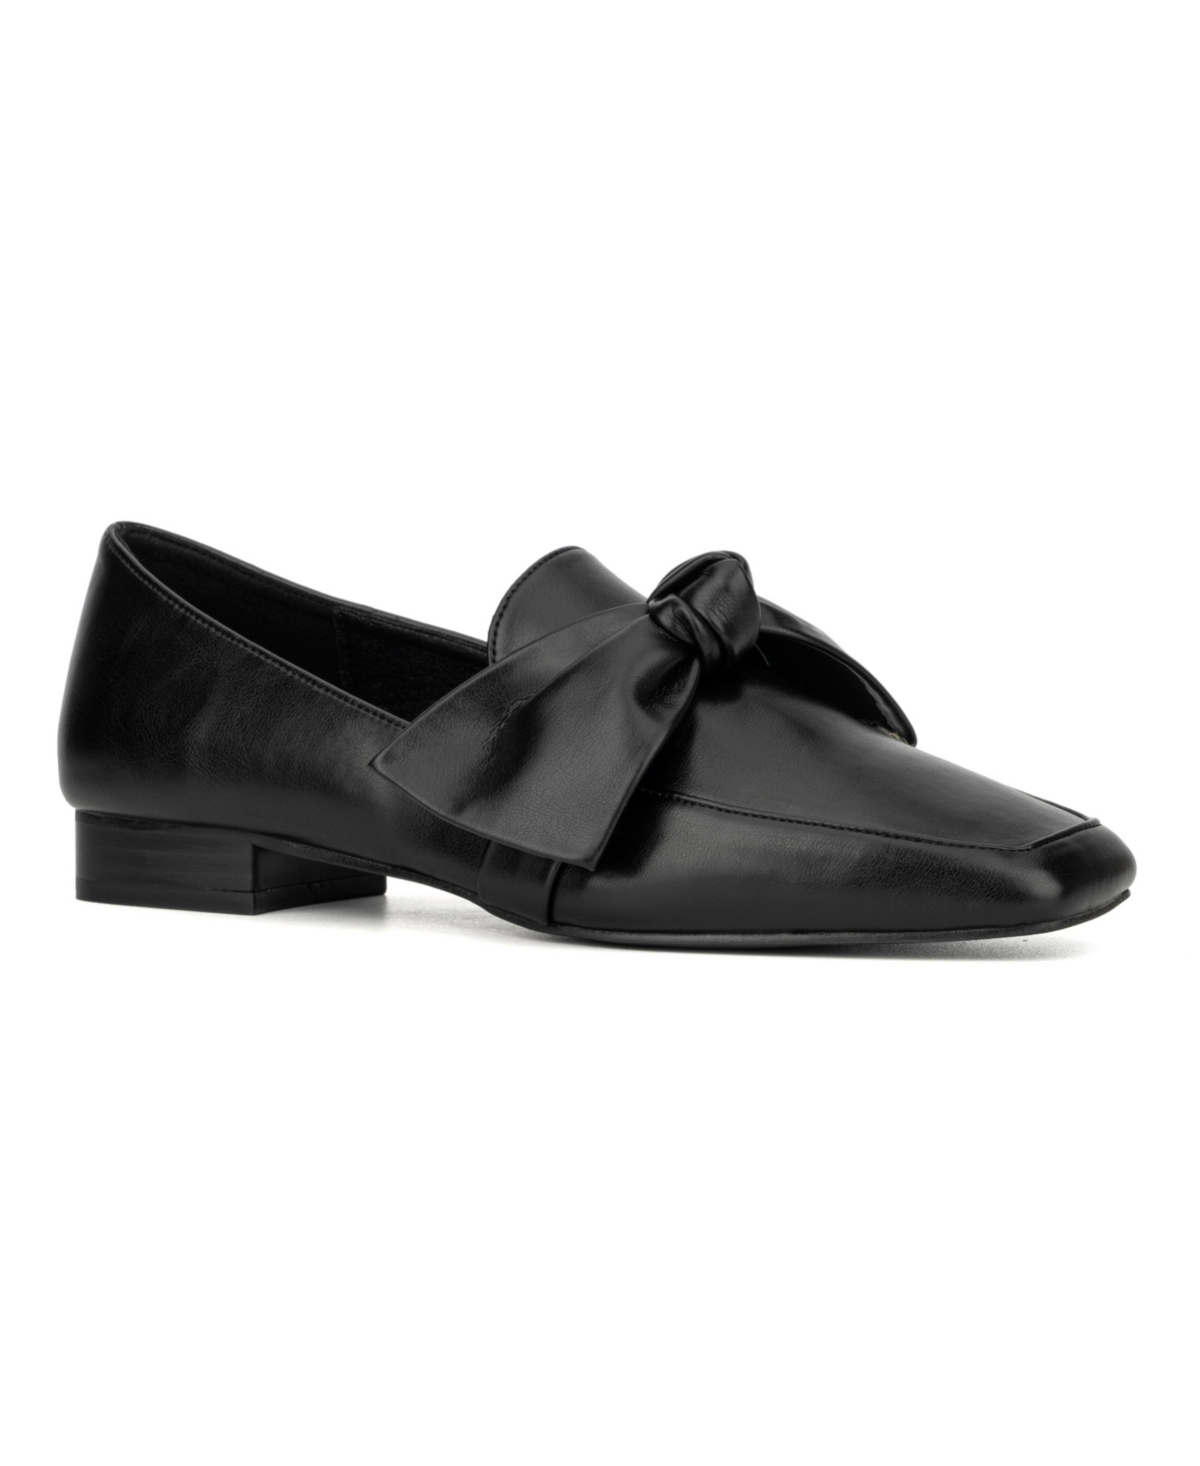 NEW YORK AND COMPANY WOMEN'S DOMINCA LOAFER